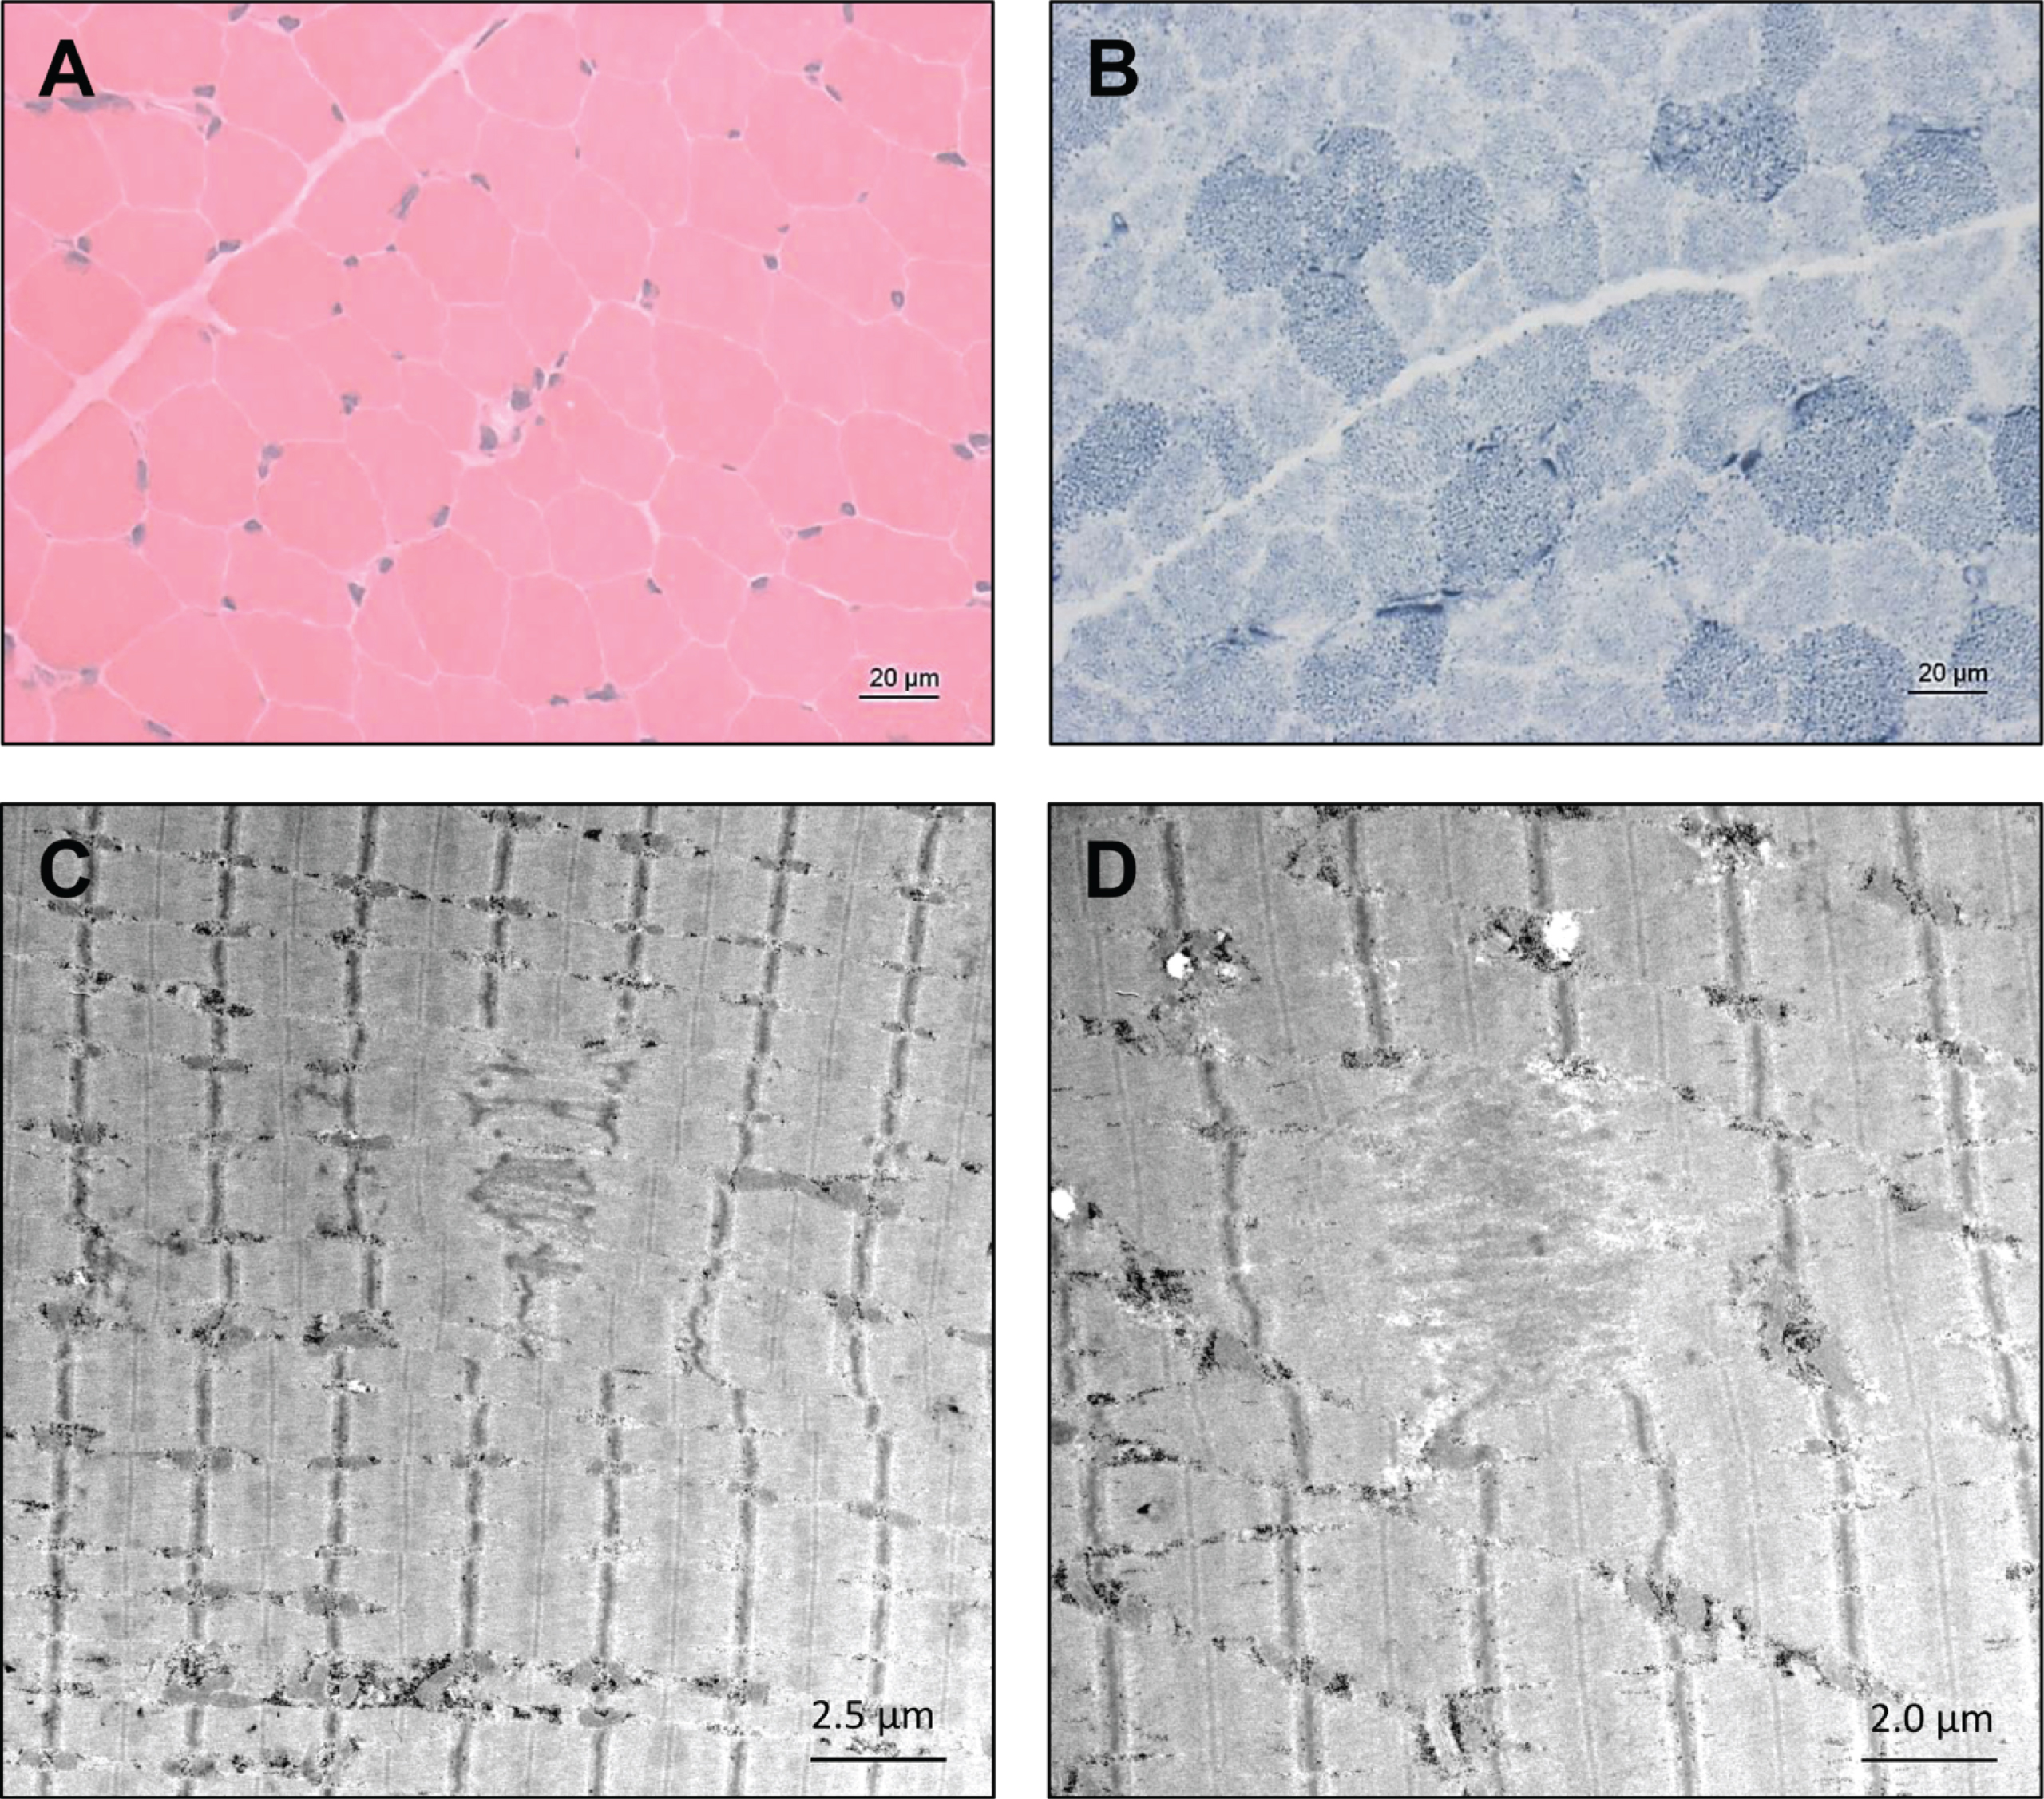 Microscopic findings in NEFL-mutant muscle. Haematoxylin & Eosin (H&E) staining did not reveal striking myopathic changes (A) whereas NADH-TR in some muscle fibers revealed increased subsarcolemmal reactivity indicative for mitochondrial accumulations in addition to pale regions in sum indicating altered mitochondrial distribution (B, arrows). Electron microscopic studies revealed focal alterations of sarcomere pattern with streaming of Z-discs and incidental pronounced Z-disc disruption as minicore-like lesions and small cytoplasmic bodies (C and D, arrowhead).